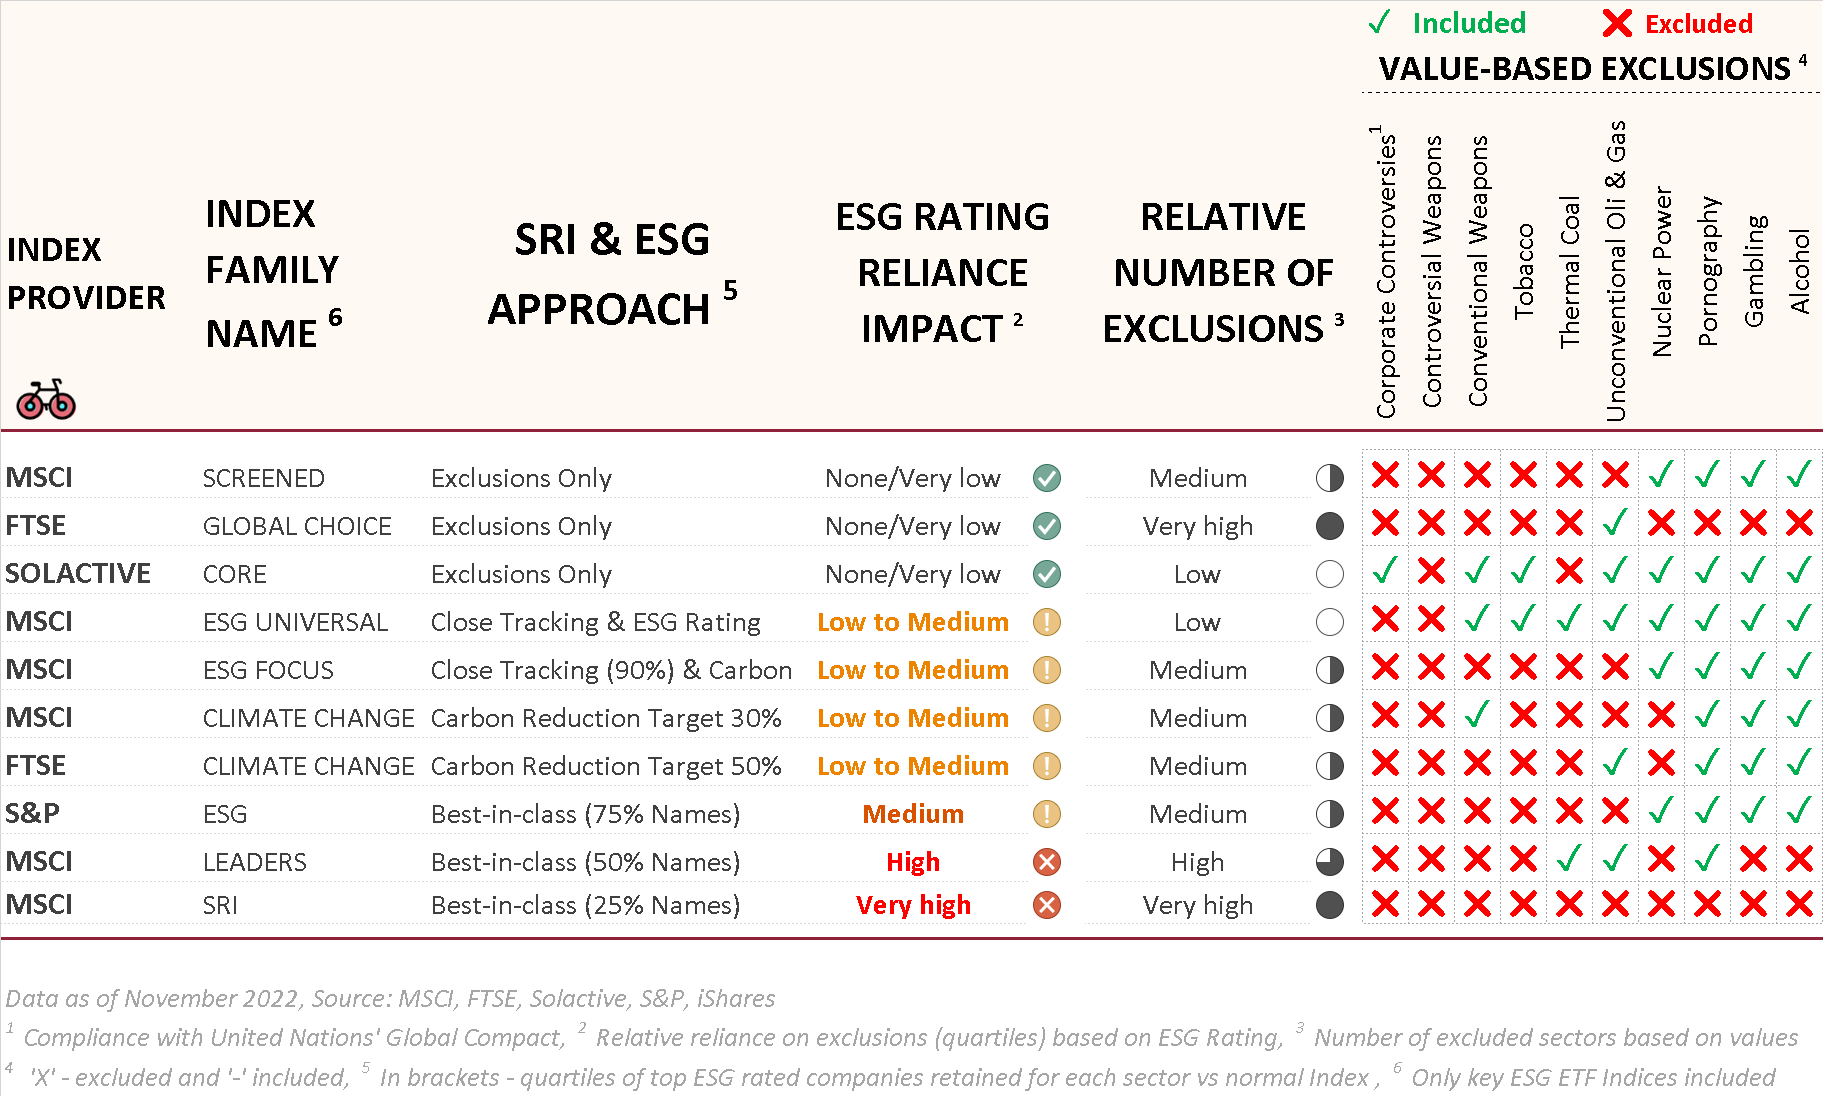 comparison of sustainable investing benchmarks - SRI exclusions and ESG rating impact for MSCI Screened, FTSE global choice, solactive core, msci esg universal, msci esg focus, msci climate change, ftse climate change, msci sri, msci leaders, S&P ESG index, best in class, carbon reduction, value based exlcusions